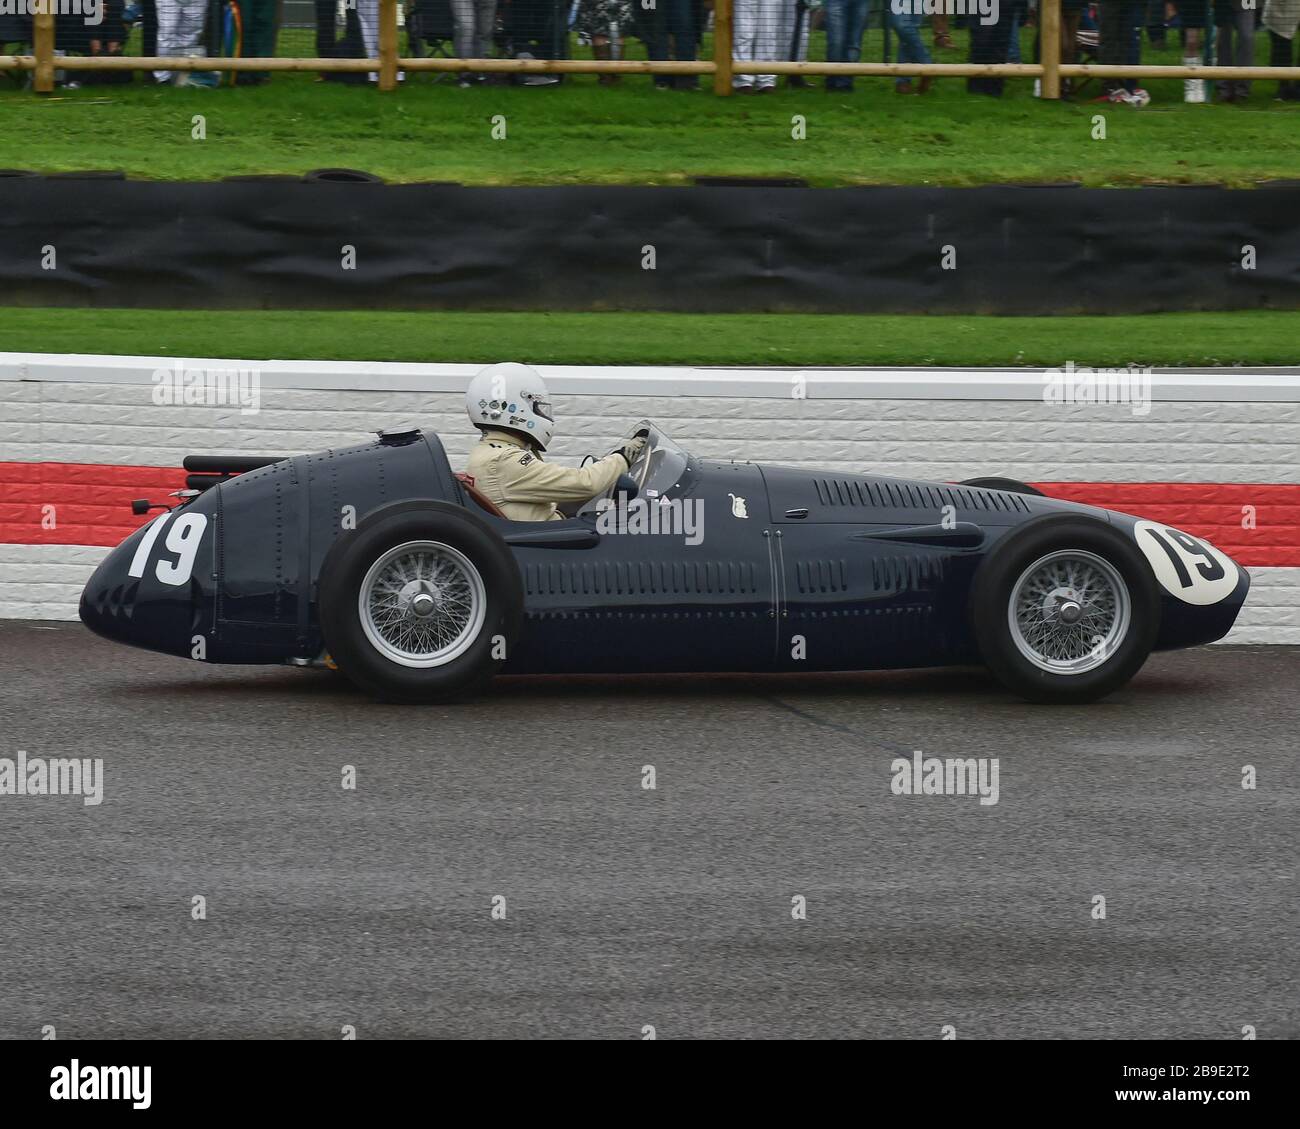 Gary Pearson, Maserati 250F, Richmond Trophy, Front engined Grand Prix cars, Formula Libre, Goodwood Revival 2017, September 2017, automobiles, cars, Stock Photo